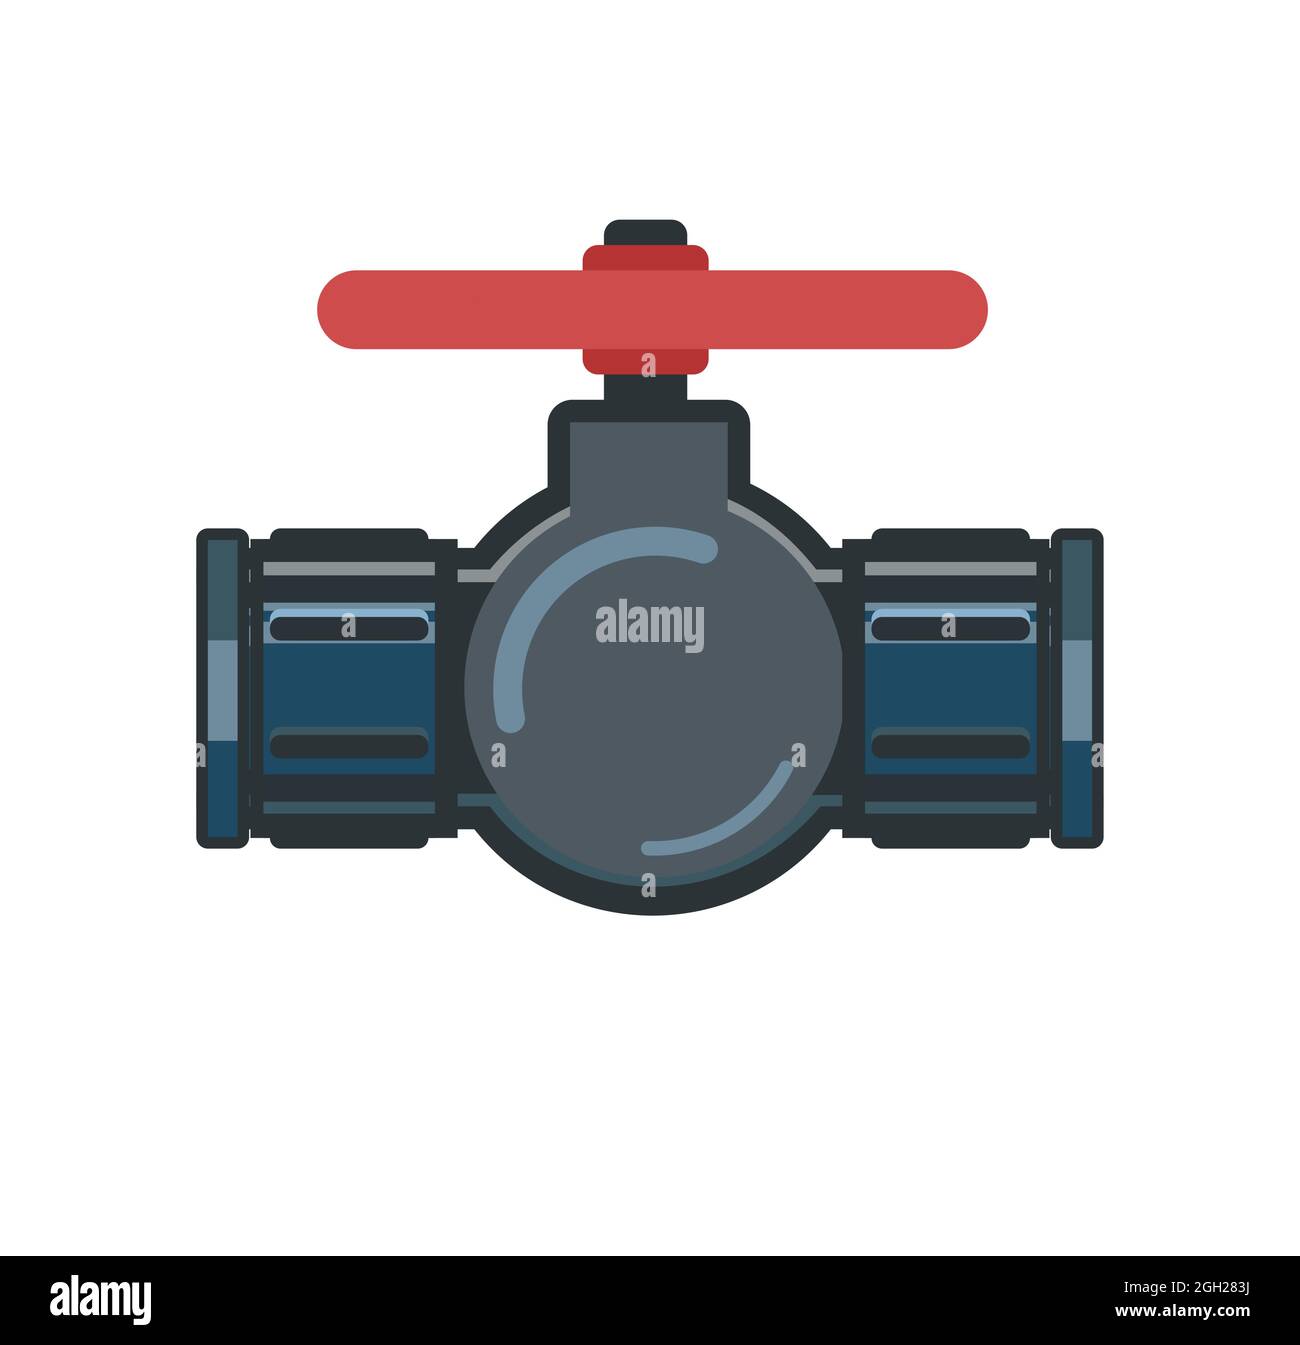 Pipeline tap. Water fittings. Pipeline for various purposes. Illustration isolated on background vector. Stock Vector